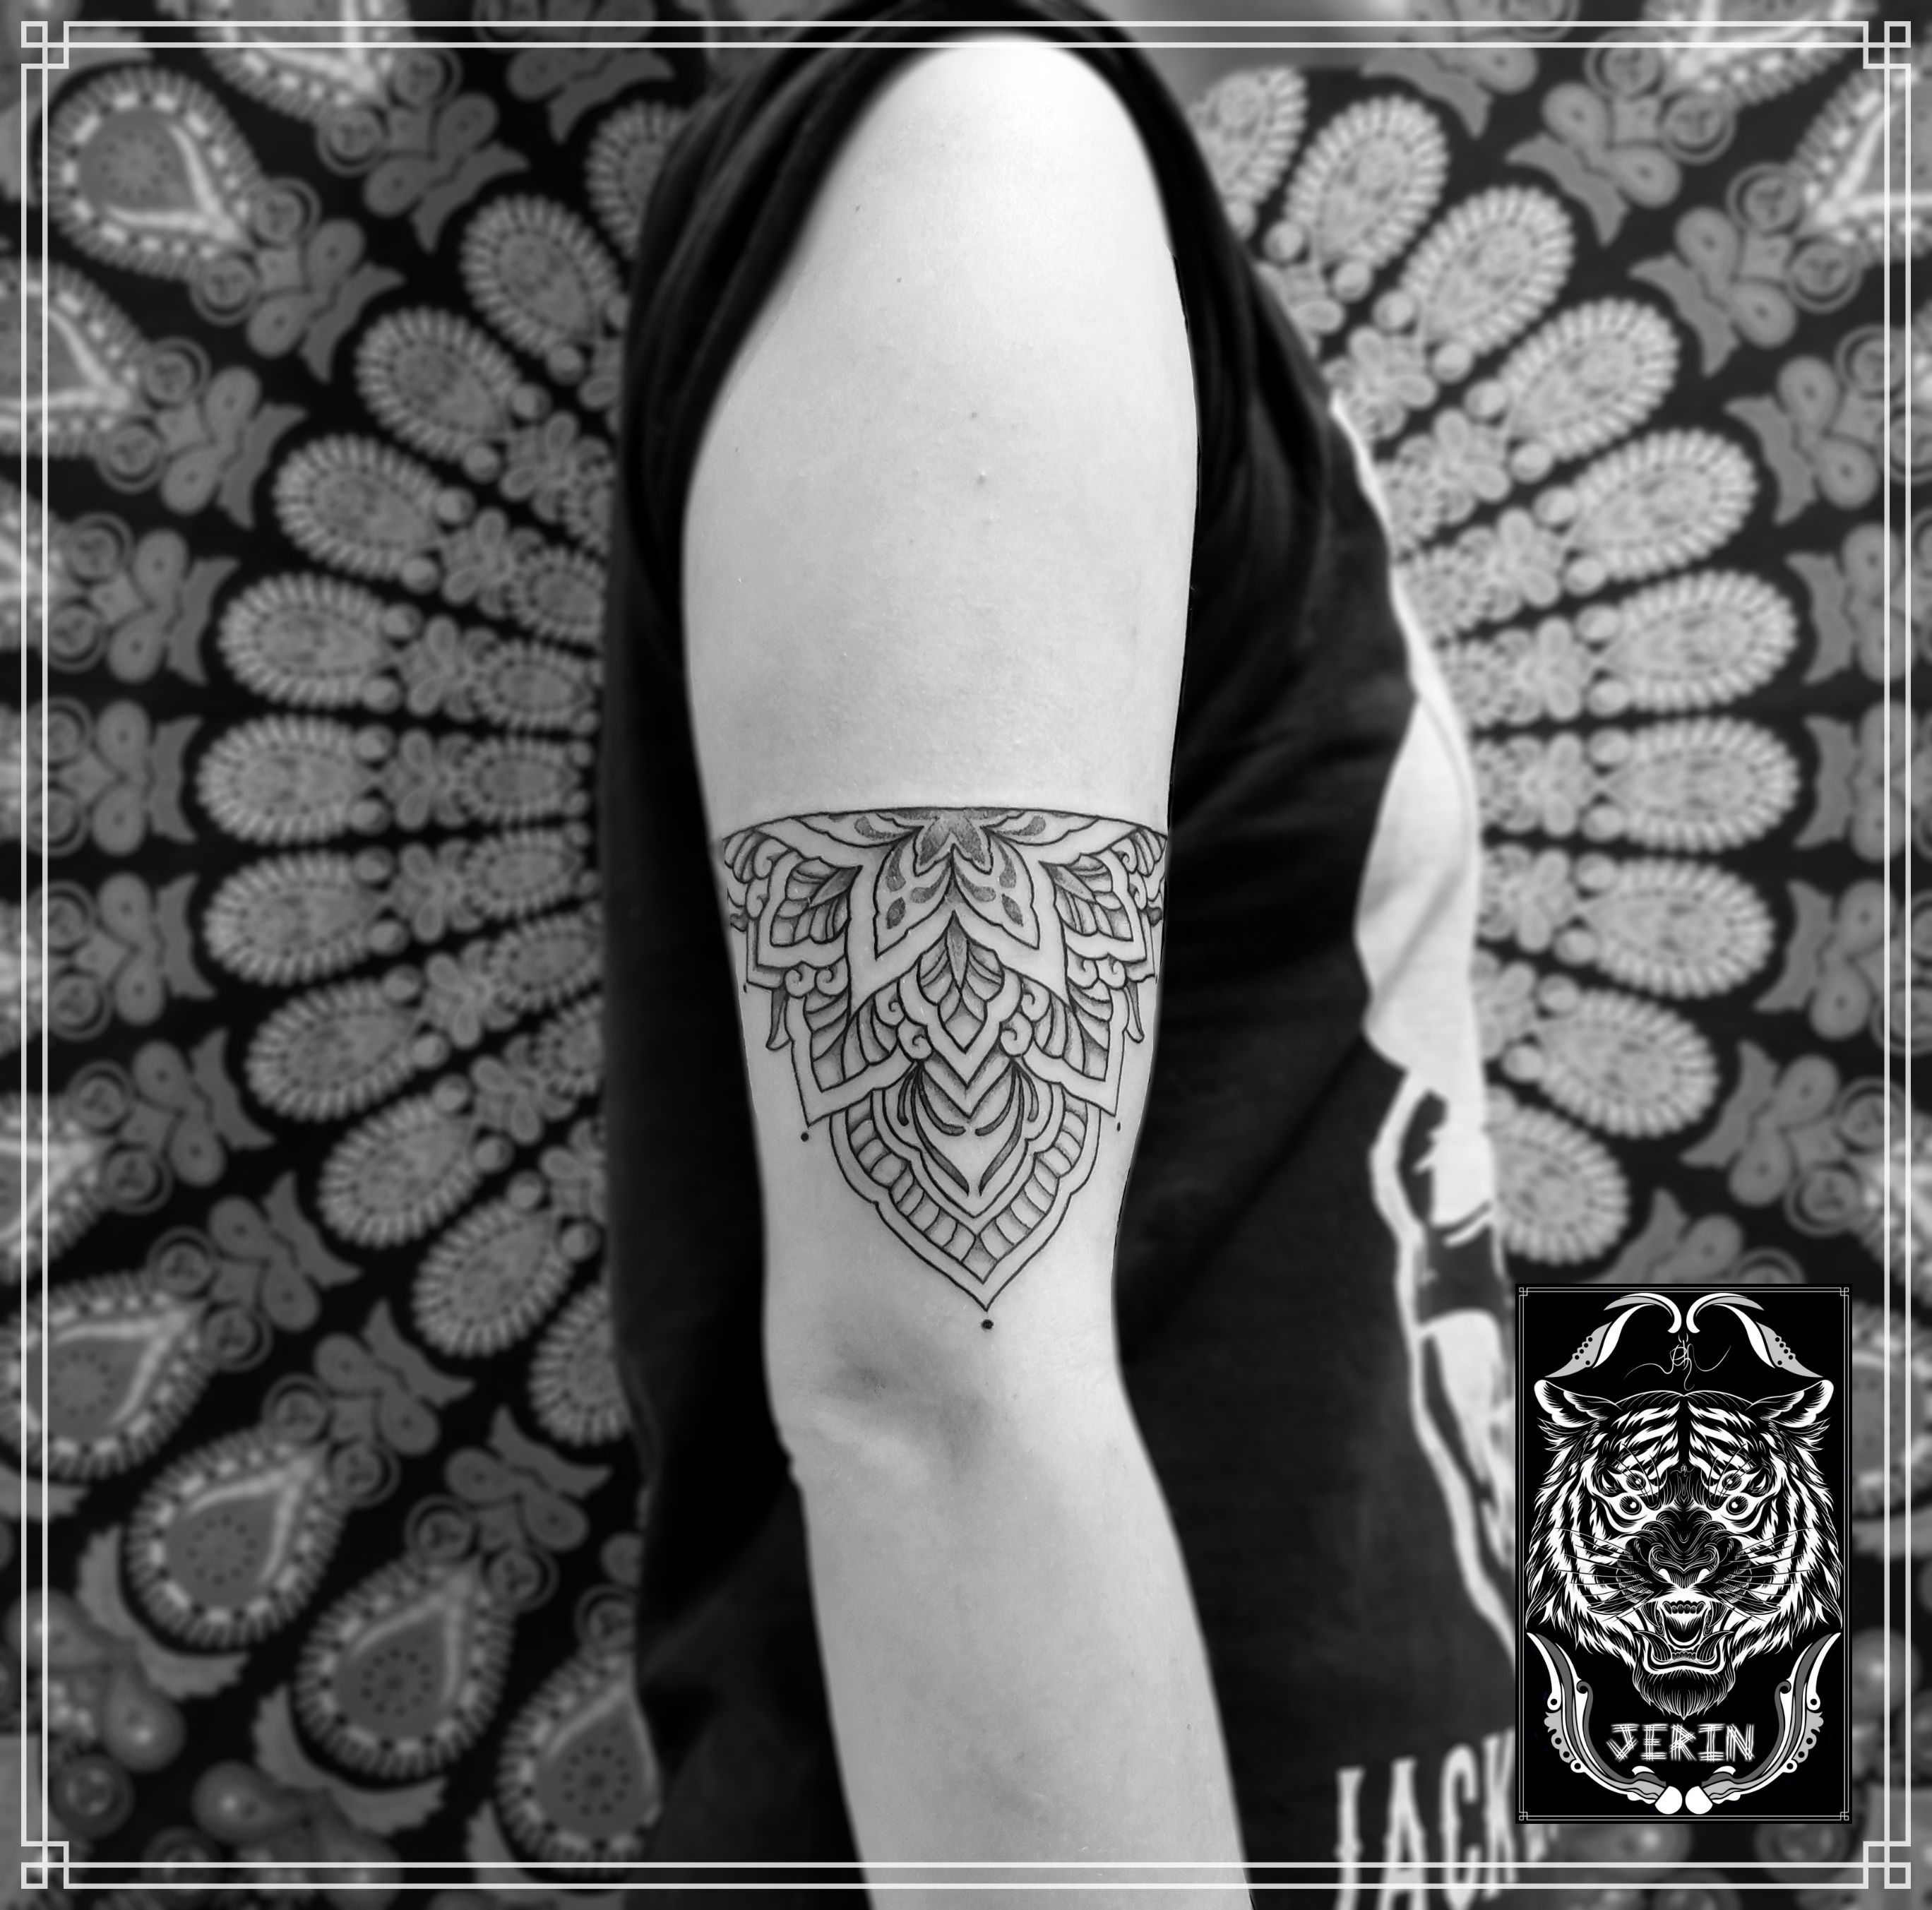 THE INDONESIAN NEW WAVE TATTOOS FROM PARADISE  LARS KRUTAK